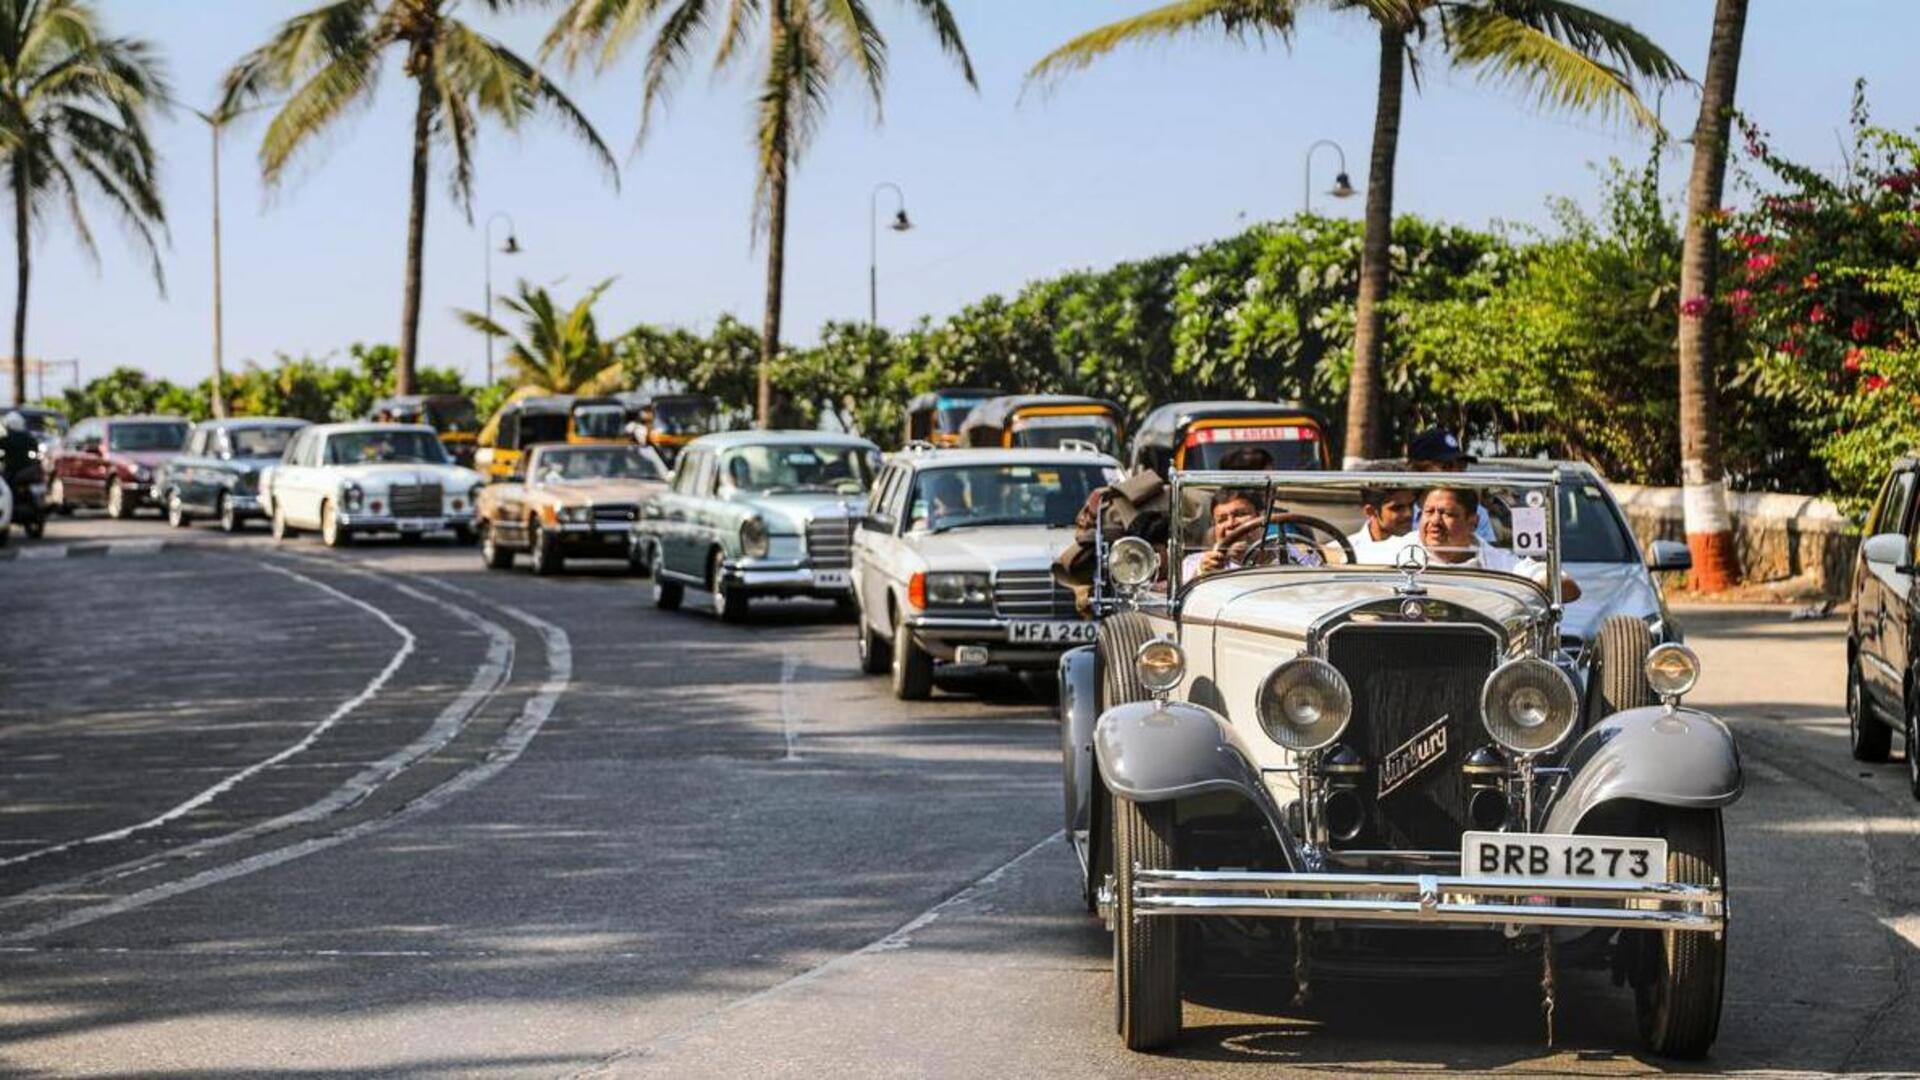 Mercedes-Benz Classic Car Rally to celebrate 10th anniversary next month